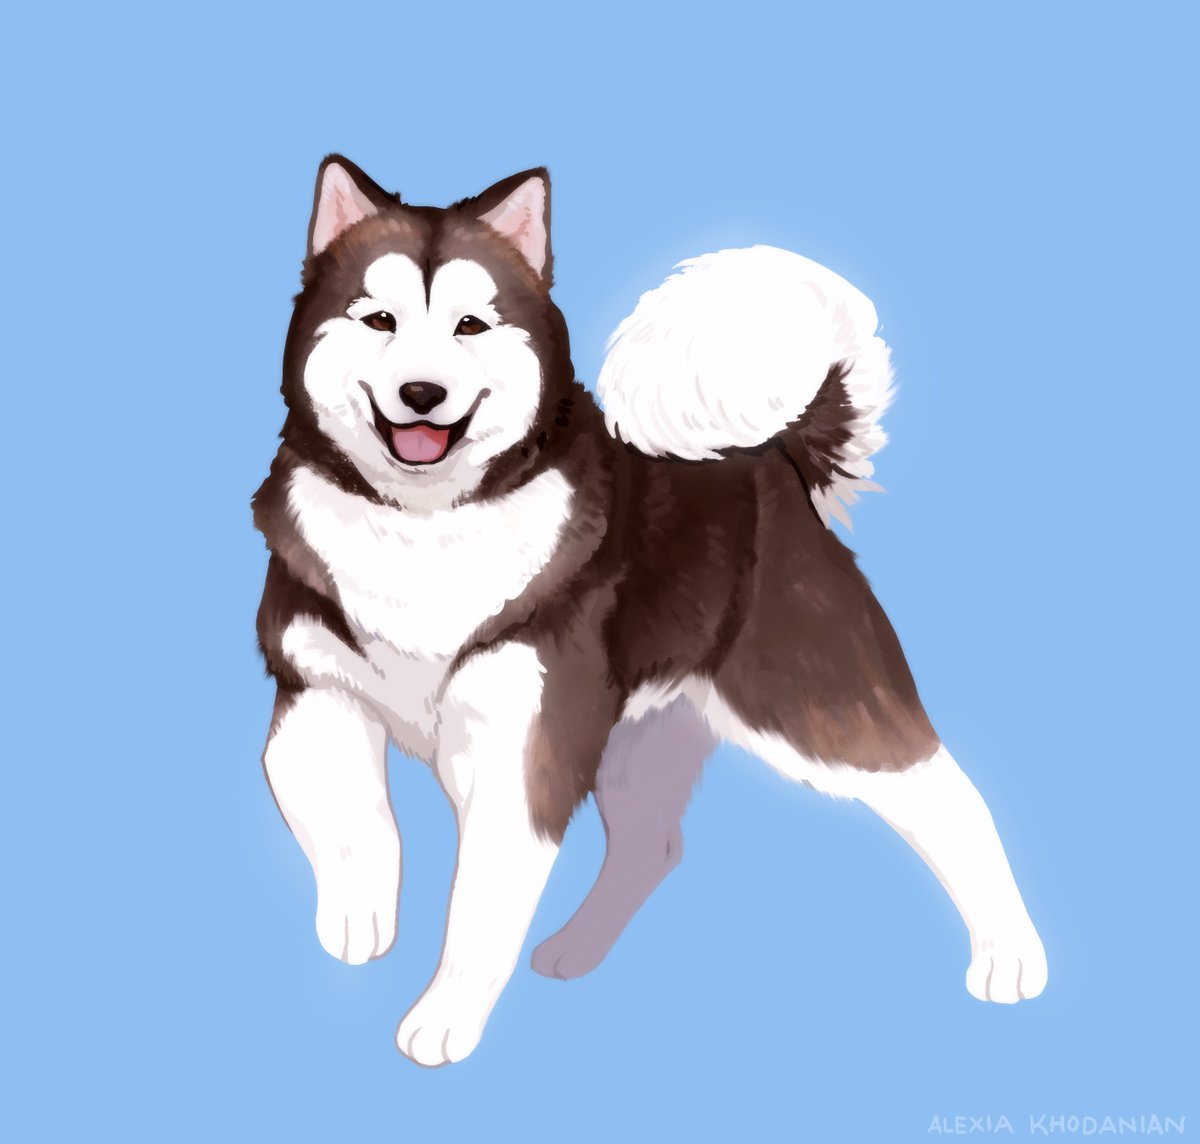  #doggust day 18: Alaskan Malamute!! So many fluffies this time of year...